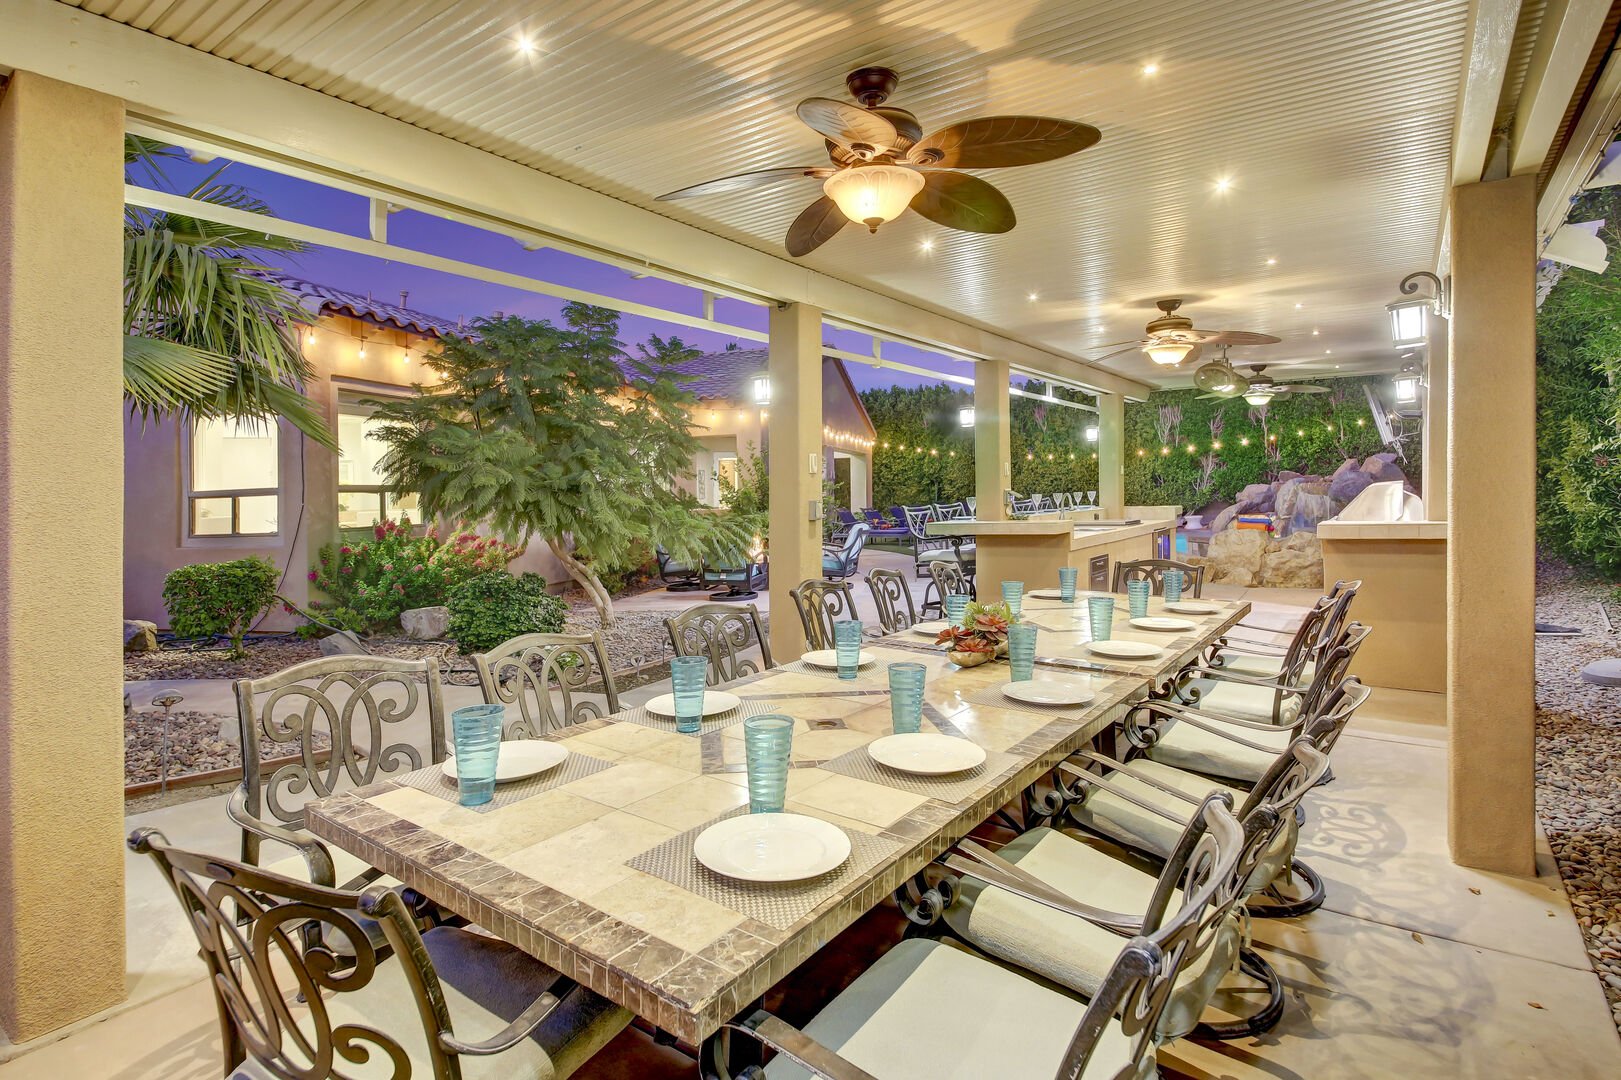 Outdoor dining space is perfect for larger groups!